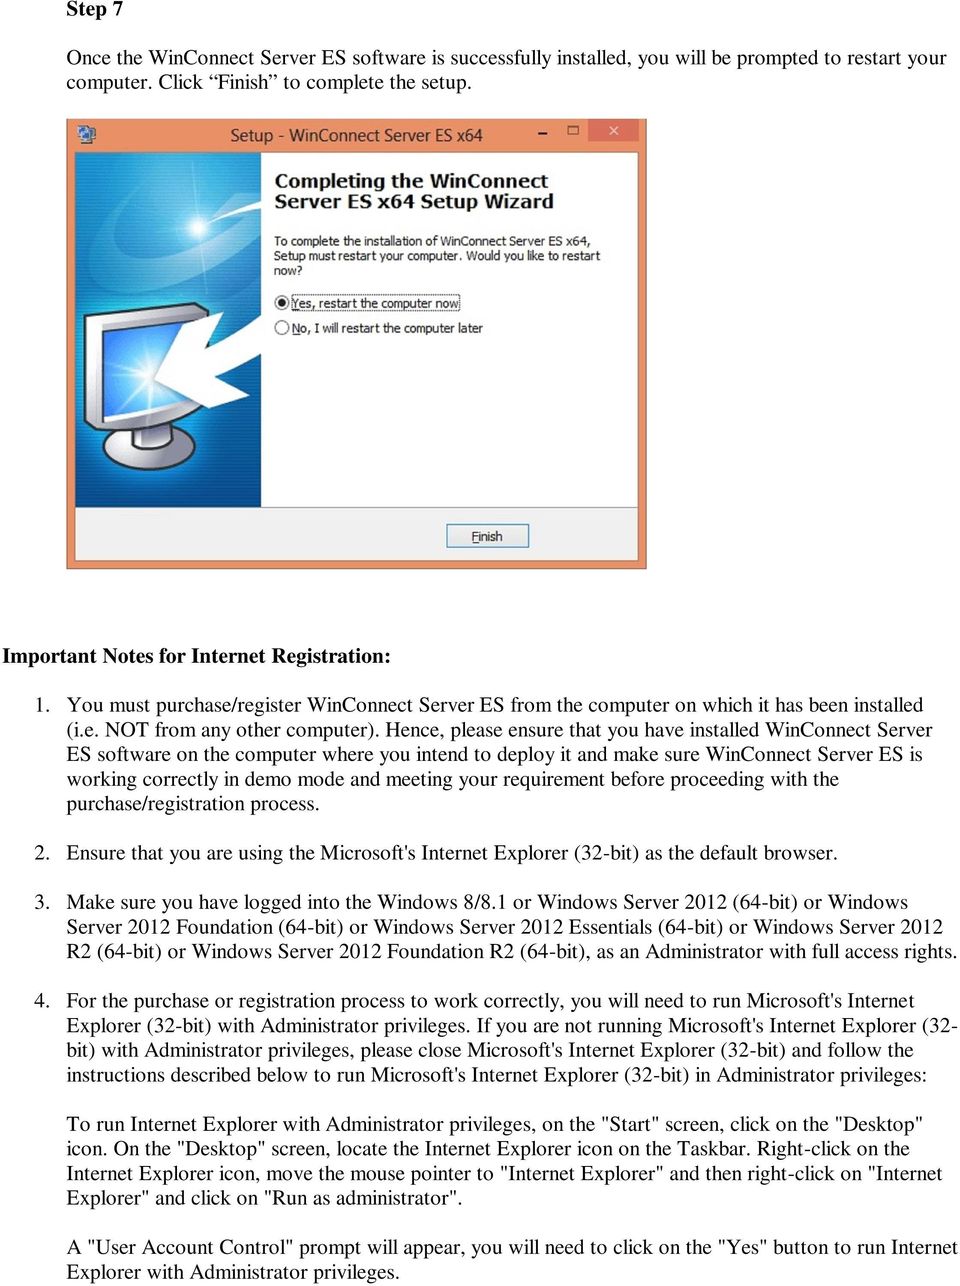 Hence, please ensure that you have installed WinConnect Server ES software on the computer where you intend to deploy it and make sure WinConnect Server ES is working correctly in demo mode and